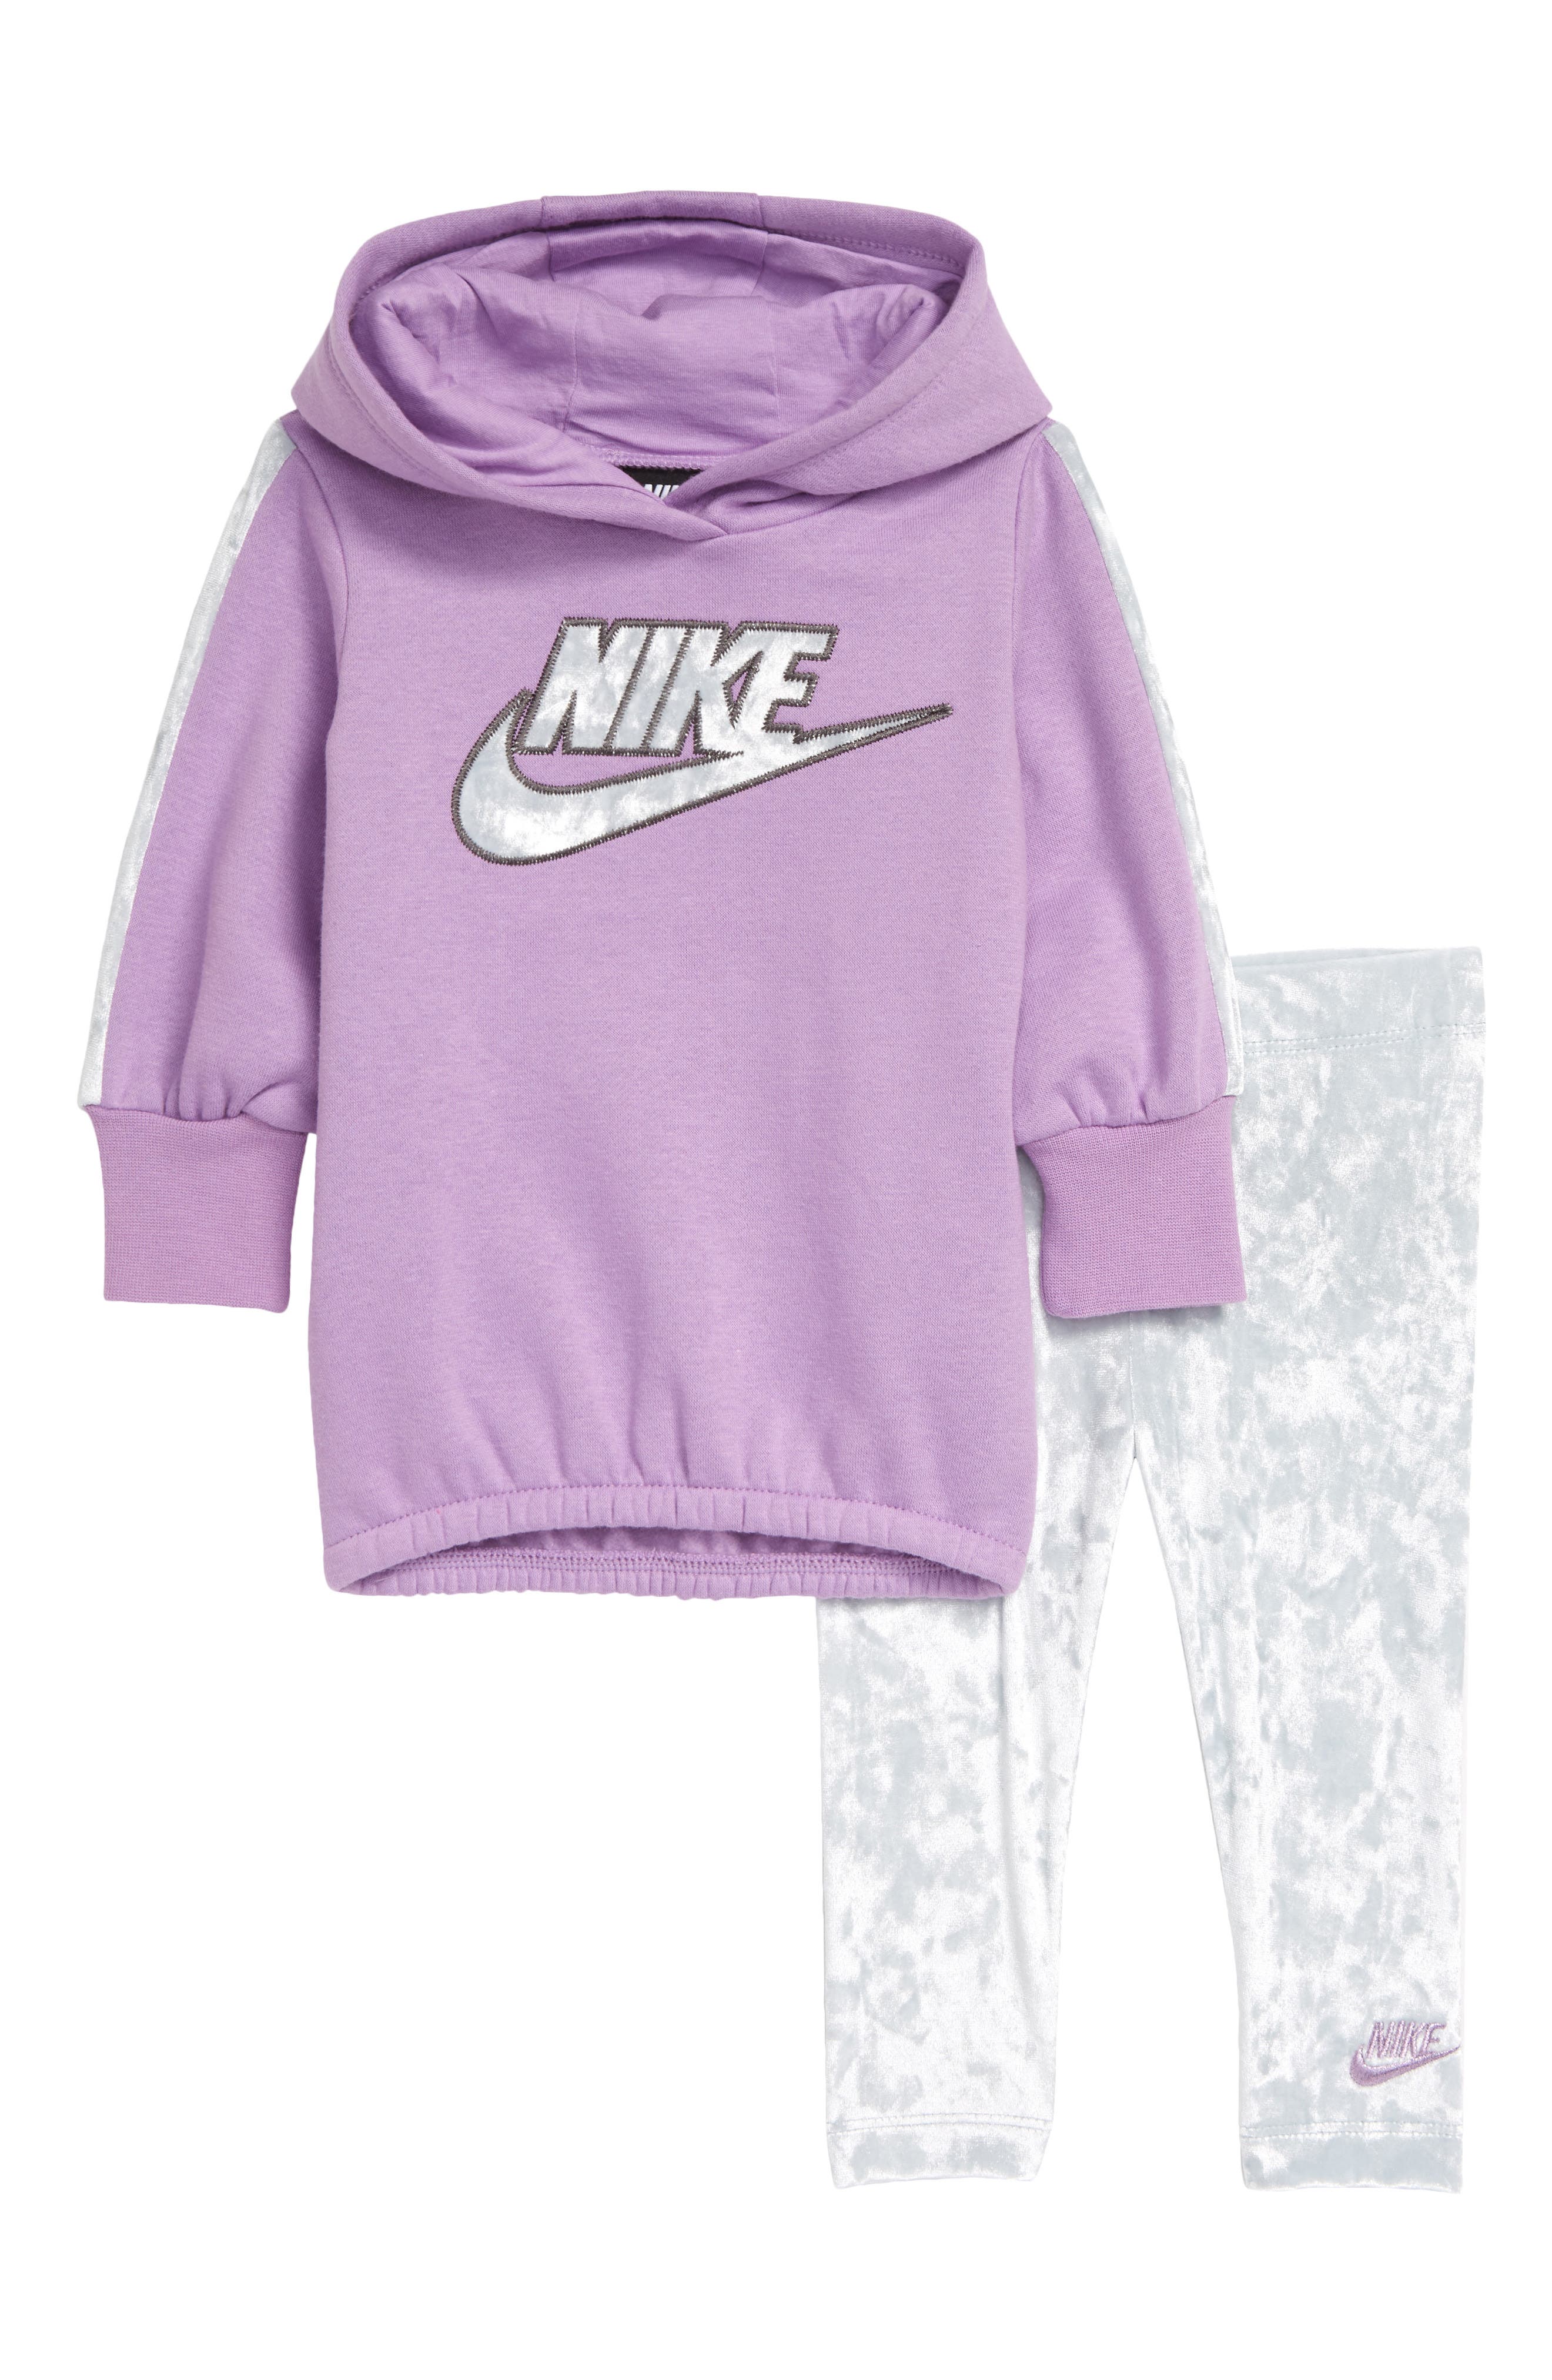 newborn baby nike outfits